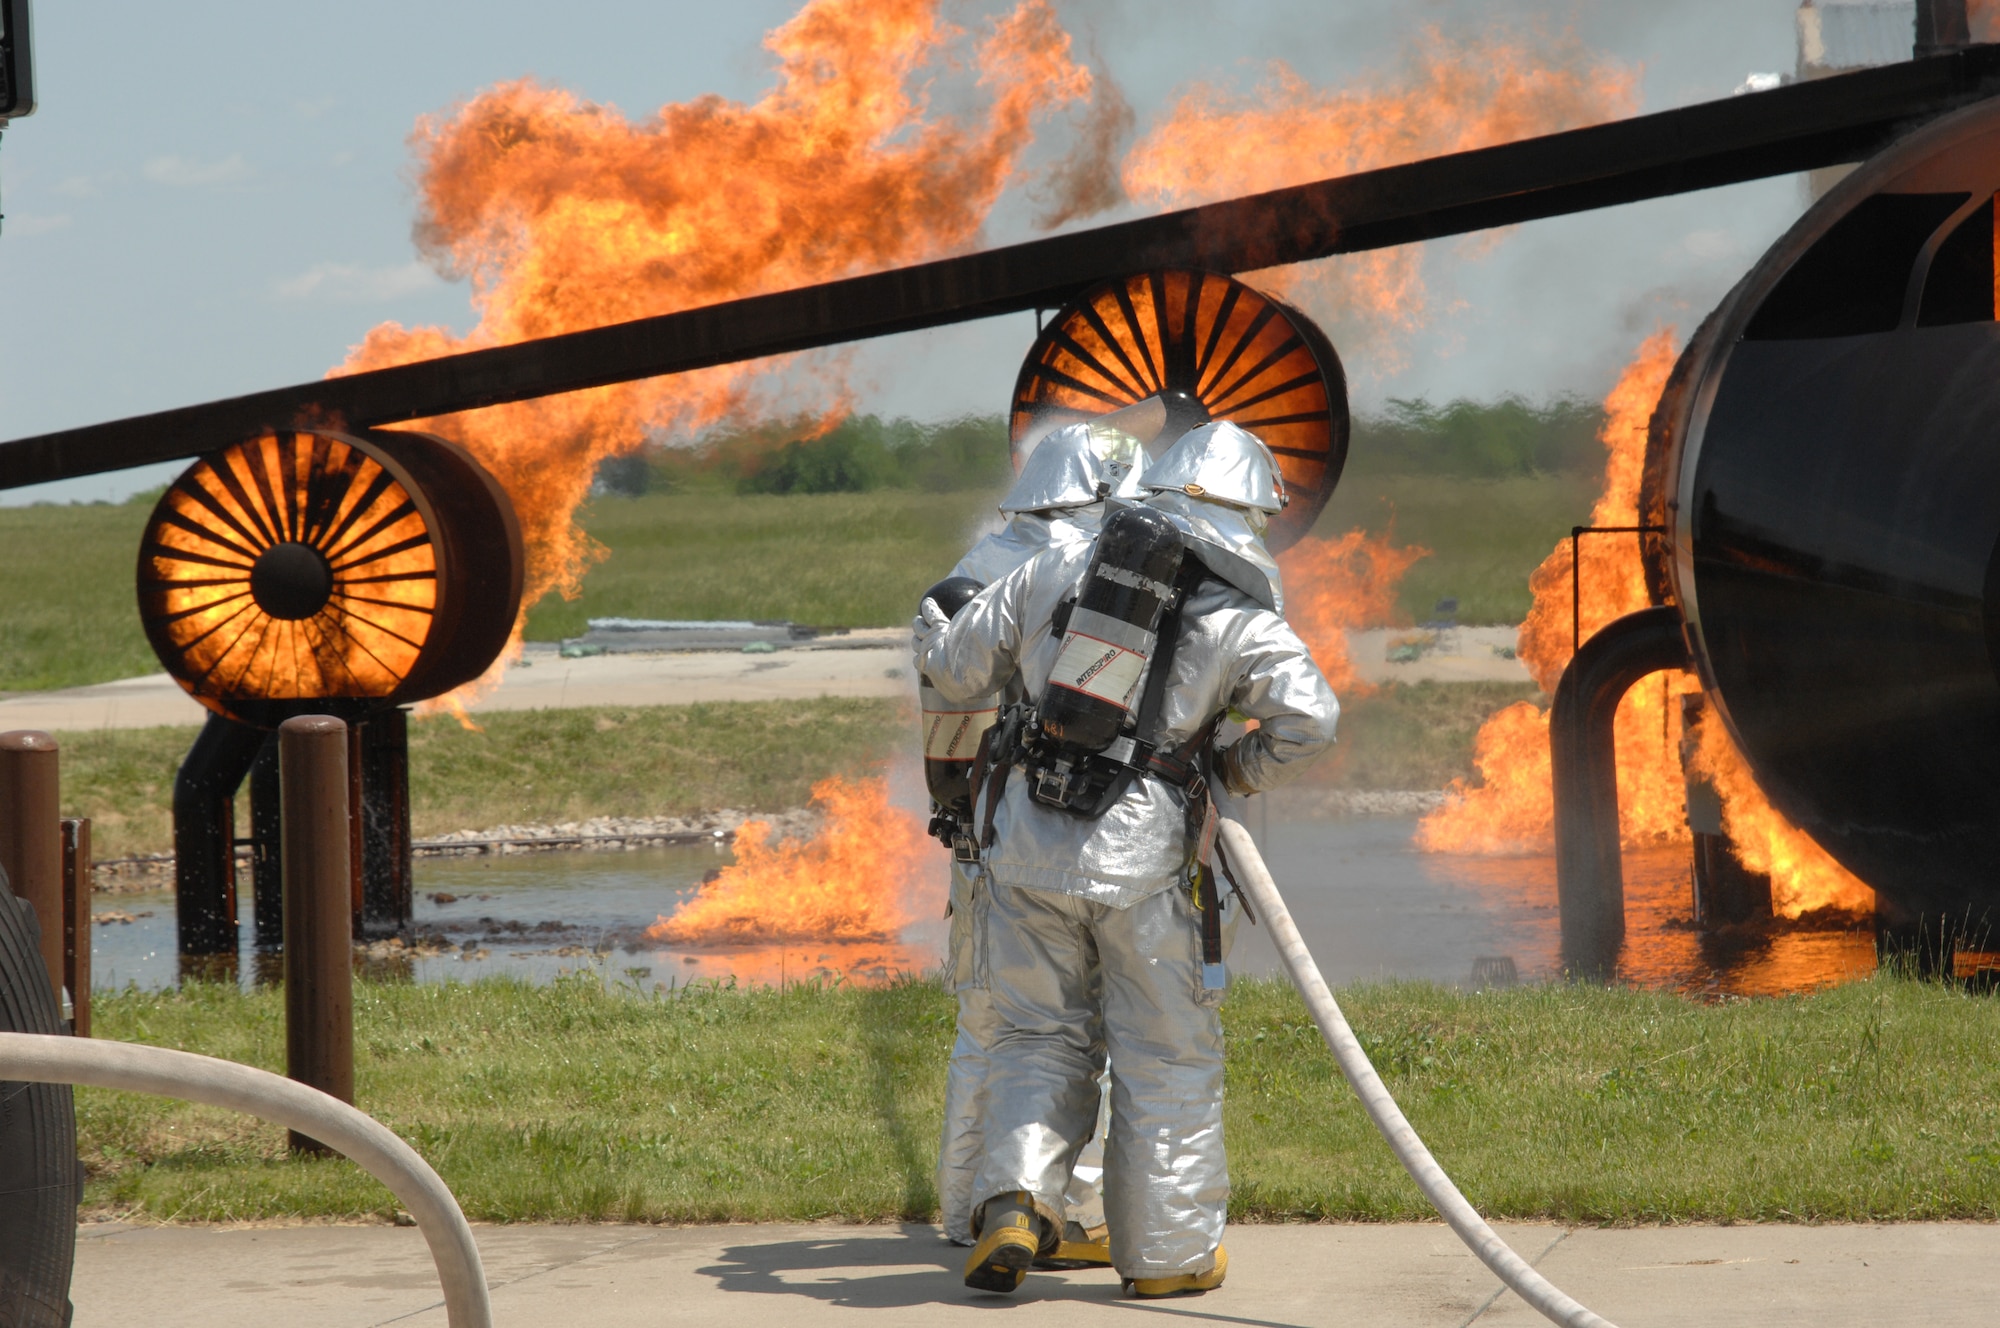 WHITEMAN AIR FORCE BASE, Mo. -- Members of the 509th Civil Engineer Squadron Fire Department put out an aircraft fire at the training pit during the Conventional Operation Readiness Inspection May 16. (U.S. Air Force photo/Tech. Sgt. Samuel A. Park)